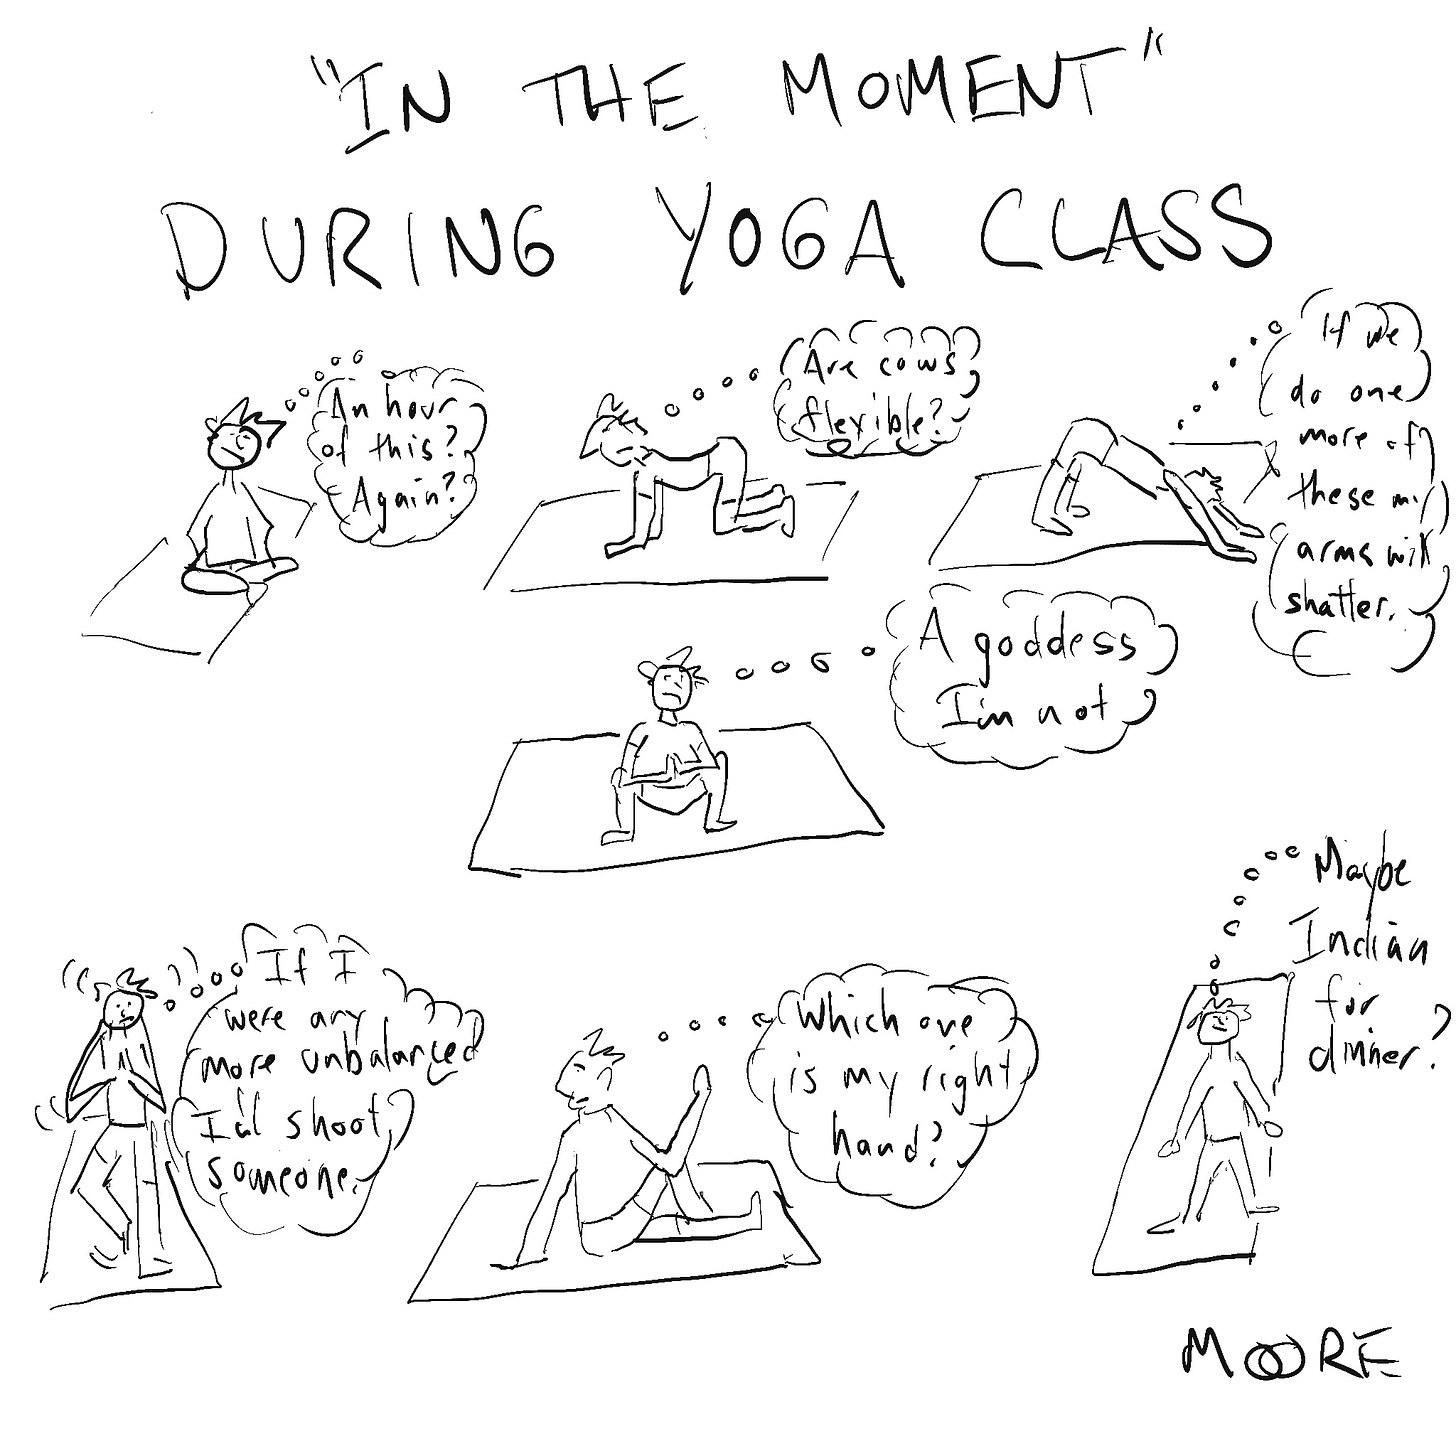 Thoughts during yoga class